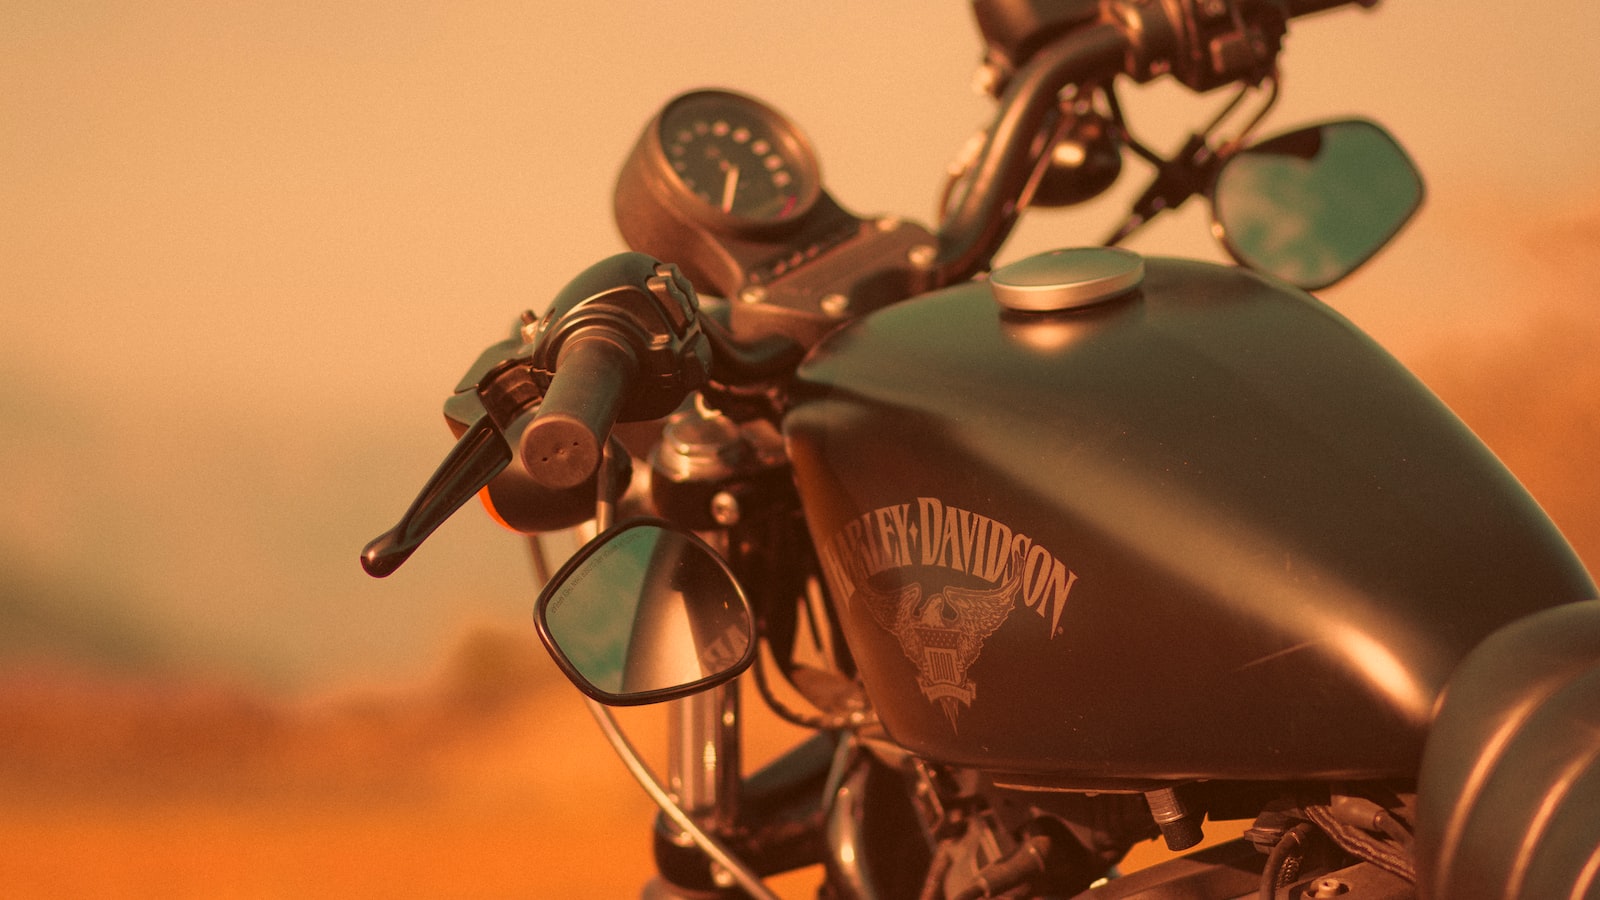 Harley Davidson Captions For Instagram: An Introduction